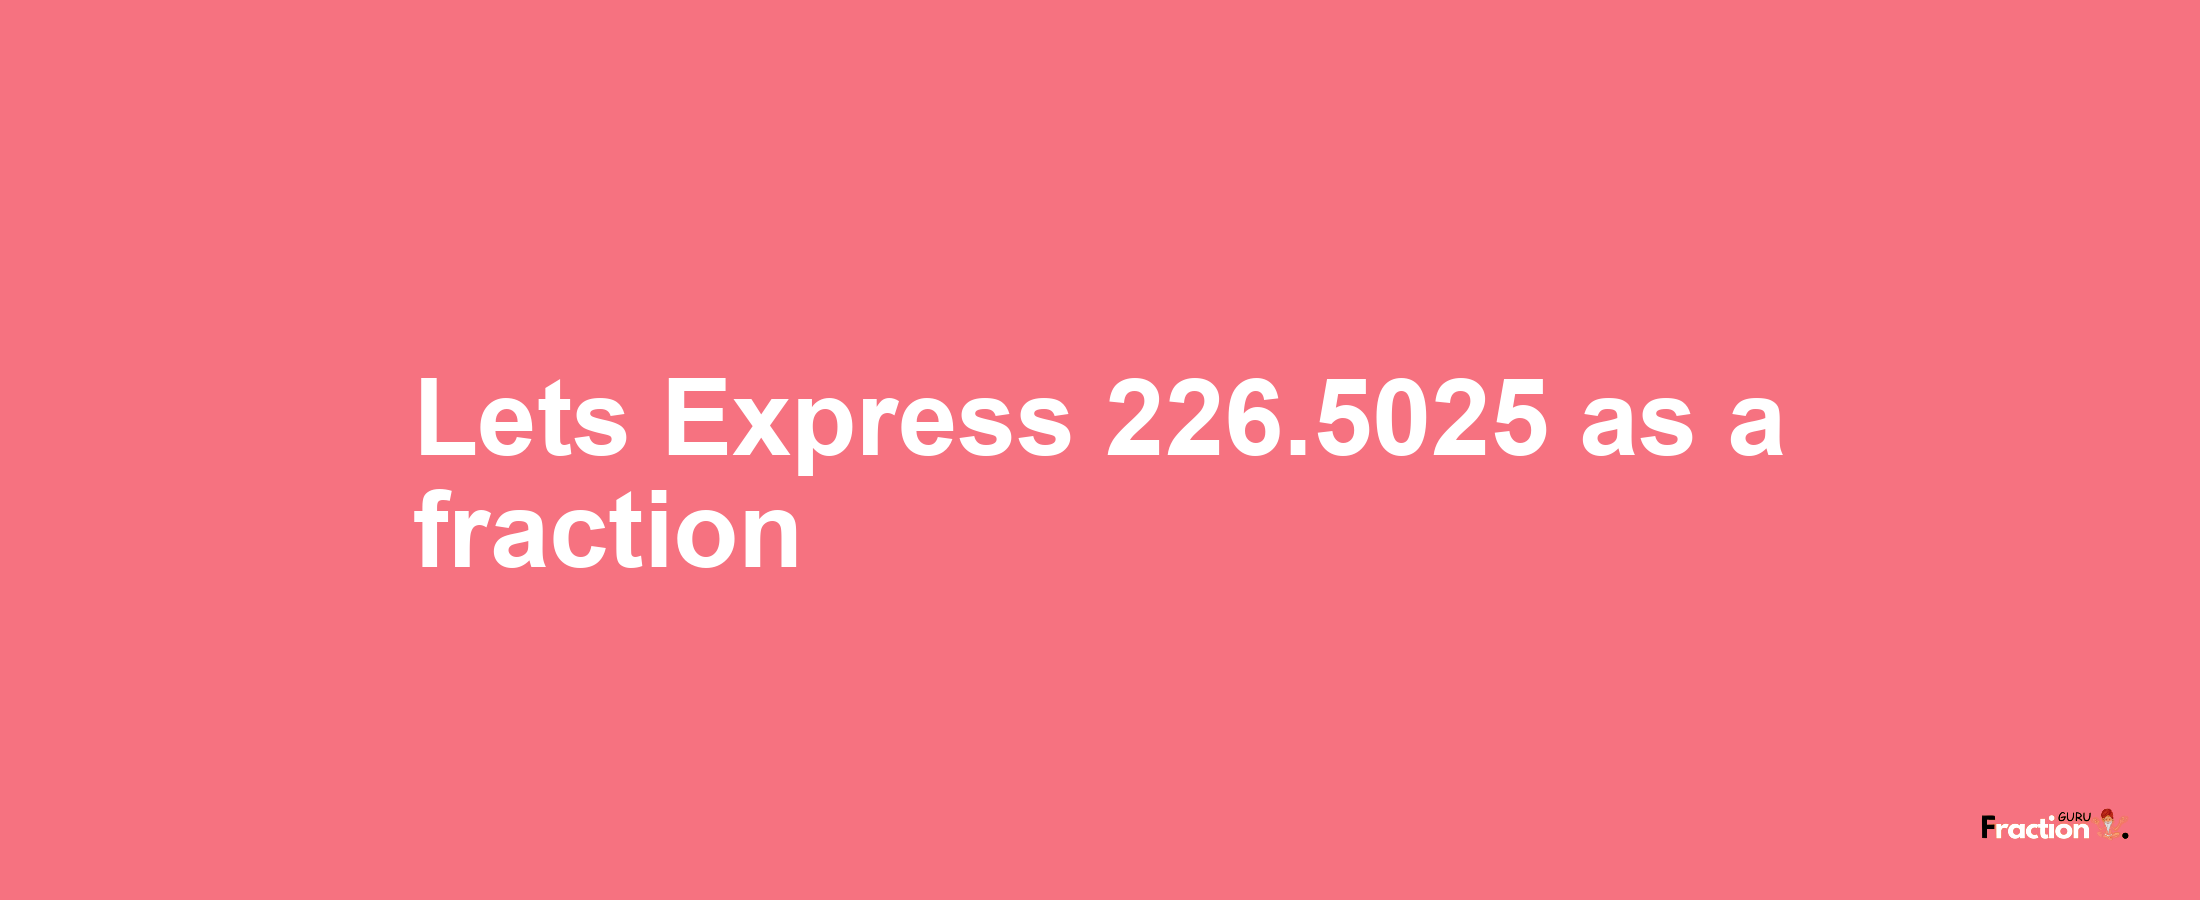 Lets Express 226.5025 as afraction